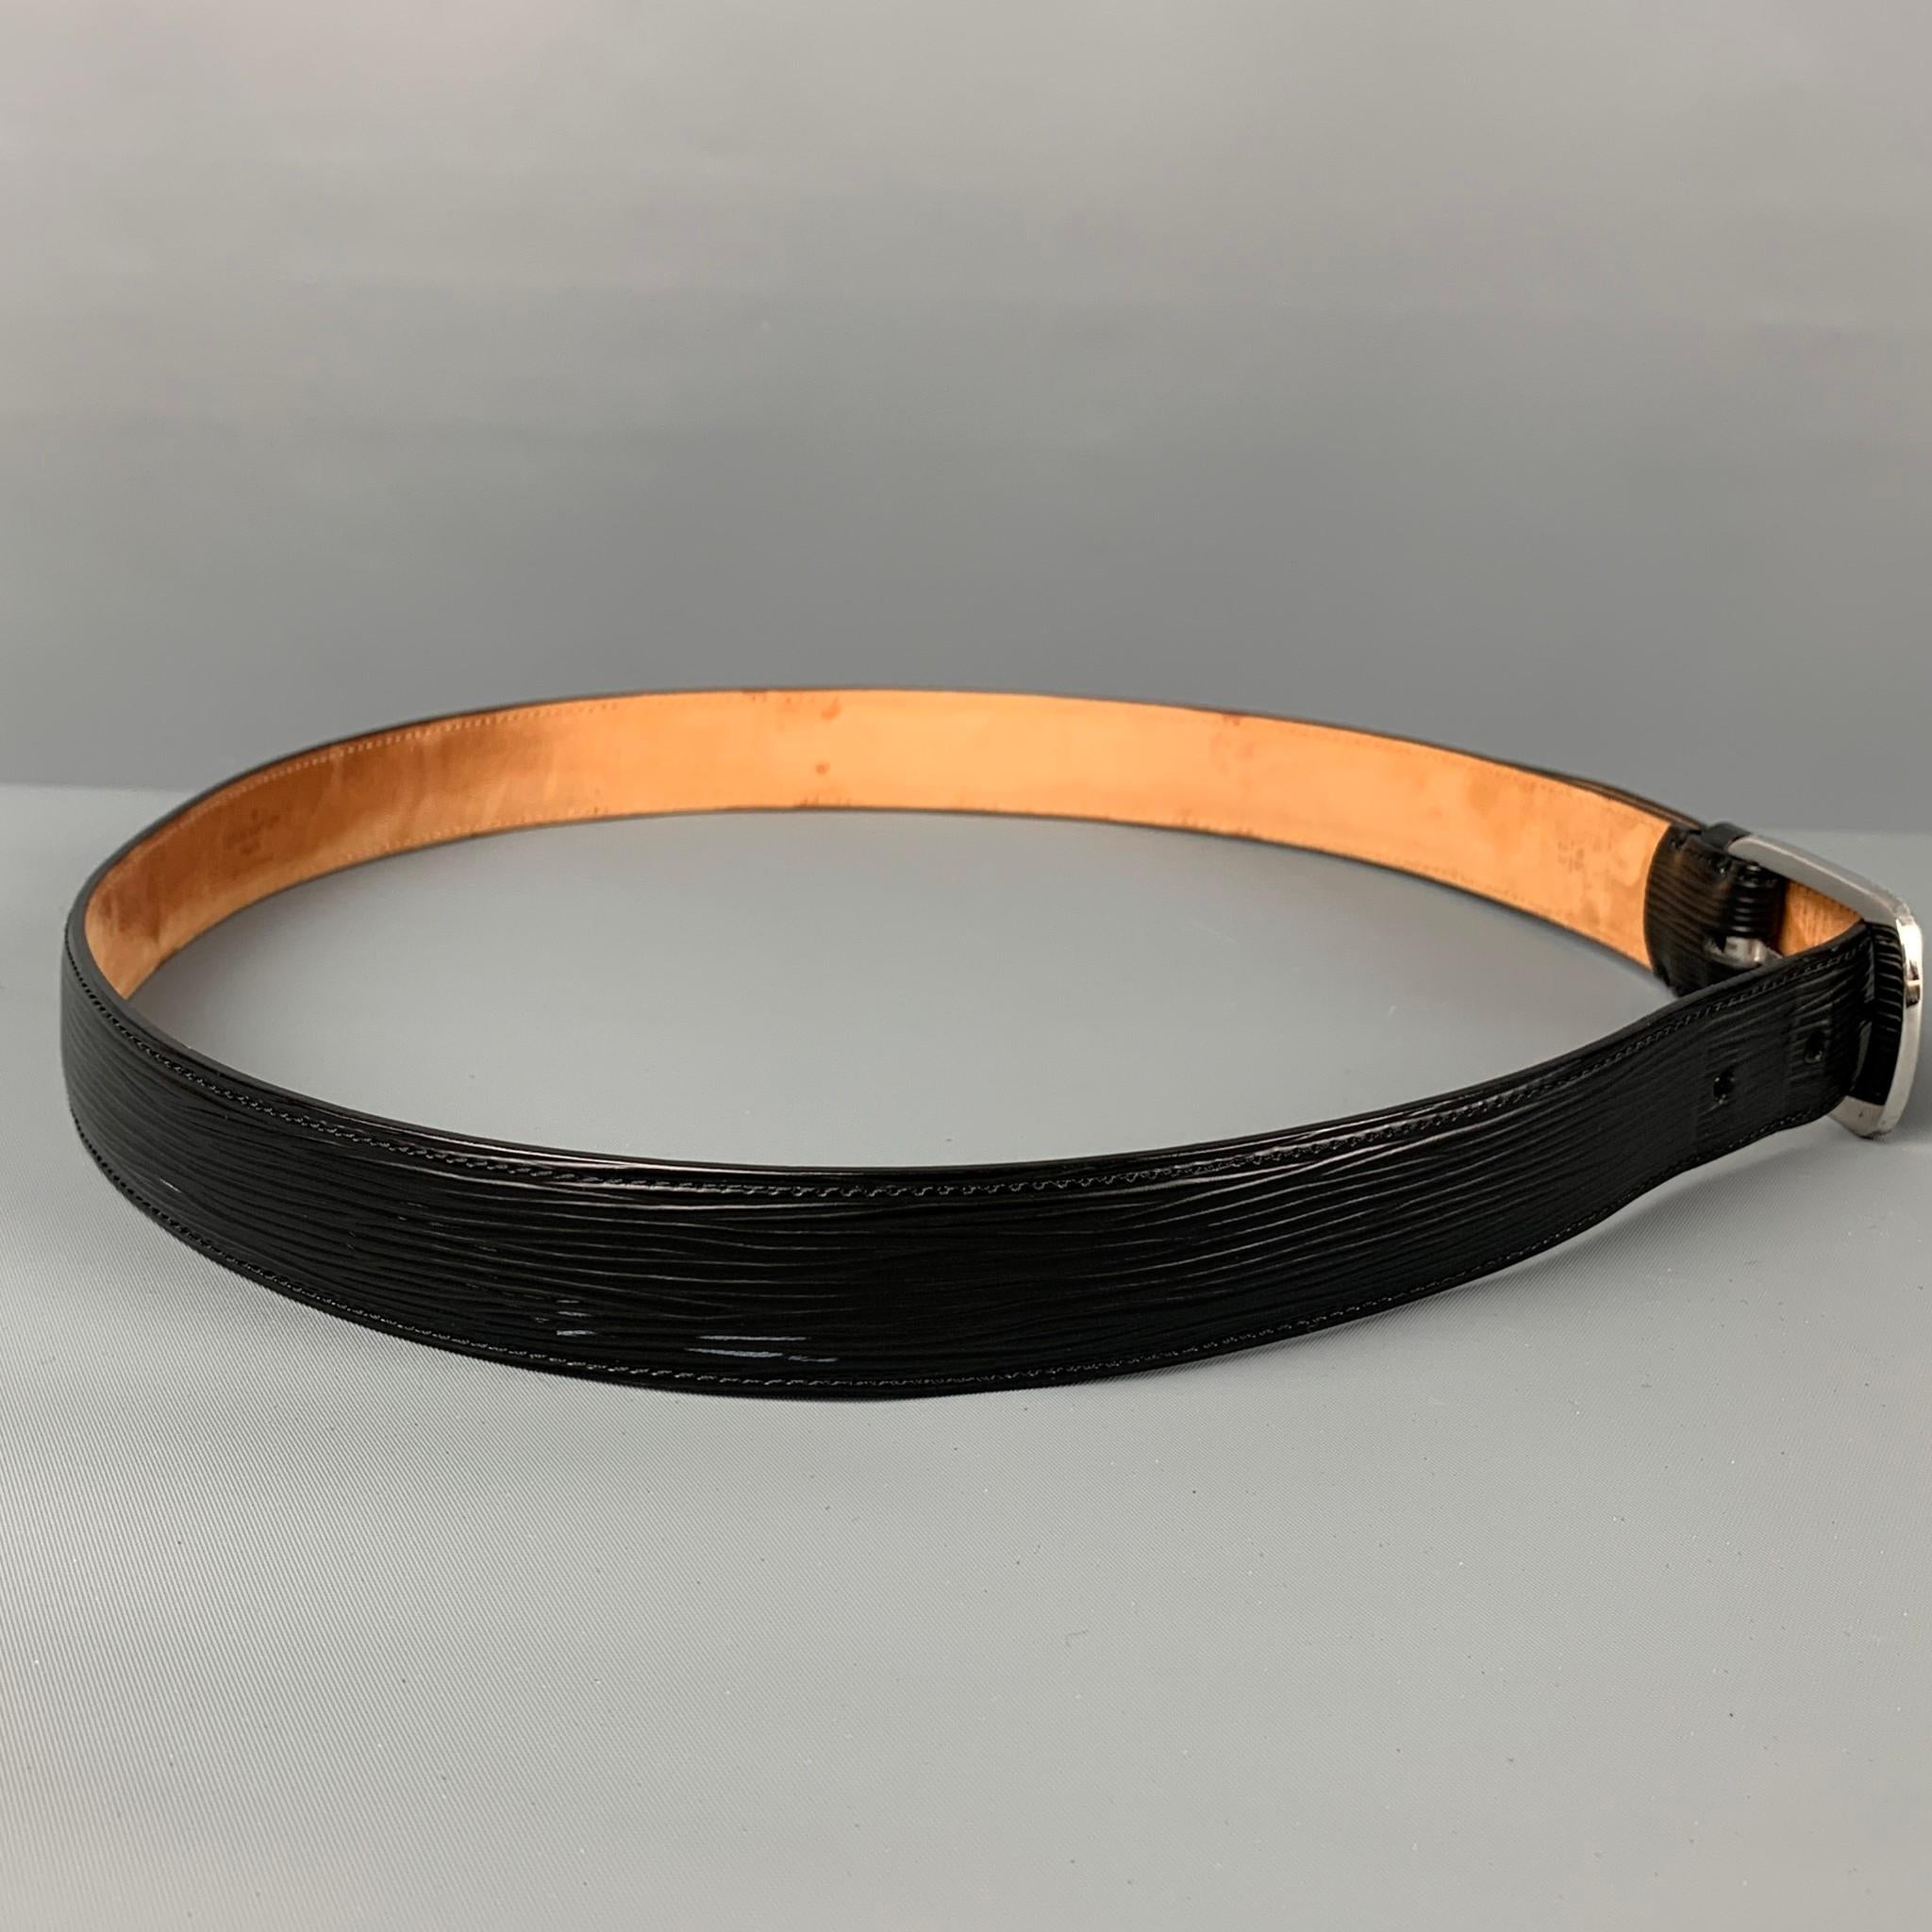 LOUIS VUITTON belt comes in a black textured epi leather featuring a silver tone buckle. Made in France. 

Very Good Pre-Owned Condition. Patina on inside of leather.
Marked: 95/38

Length: 42 in.
Width: 1 in.
Fits: 34.5 - 37.5 in.
Buckle: 2 in. 